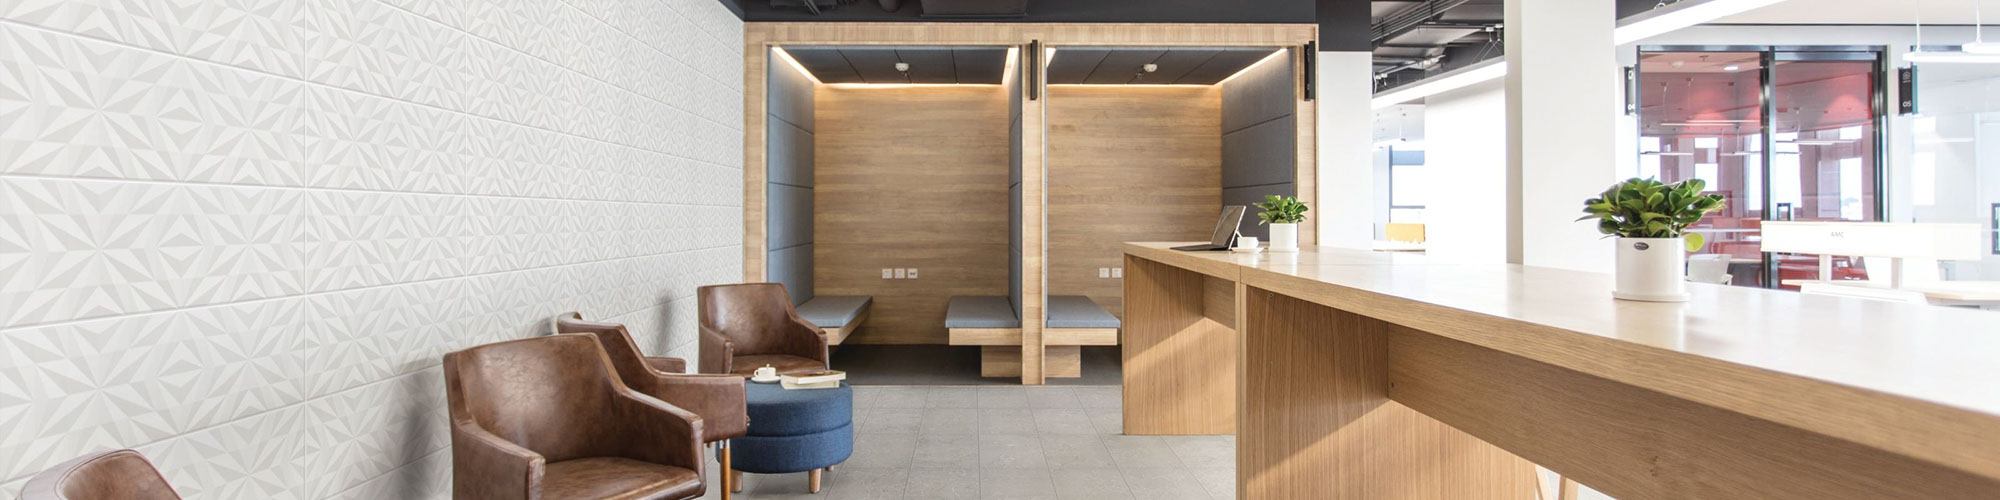 Office breakroom with floor tile that looks like gray stone, feature wall with white textured tile, brown leather chairs, long wood counter, round lighting hanging from black metal ceiling.